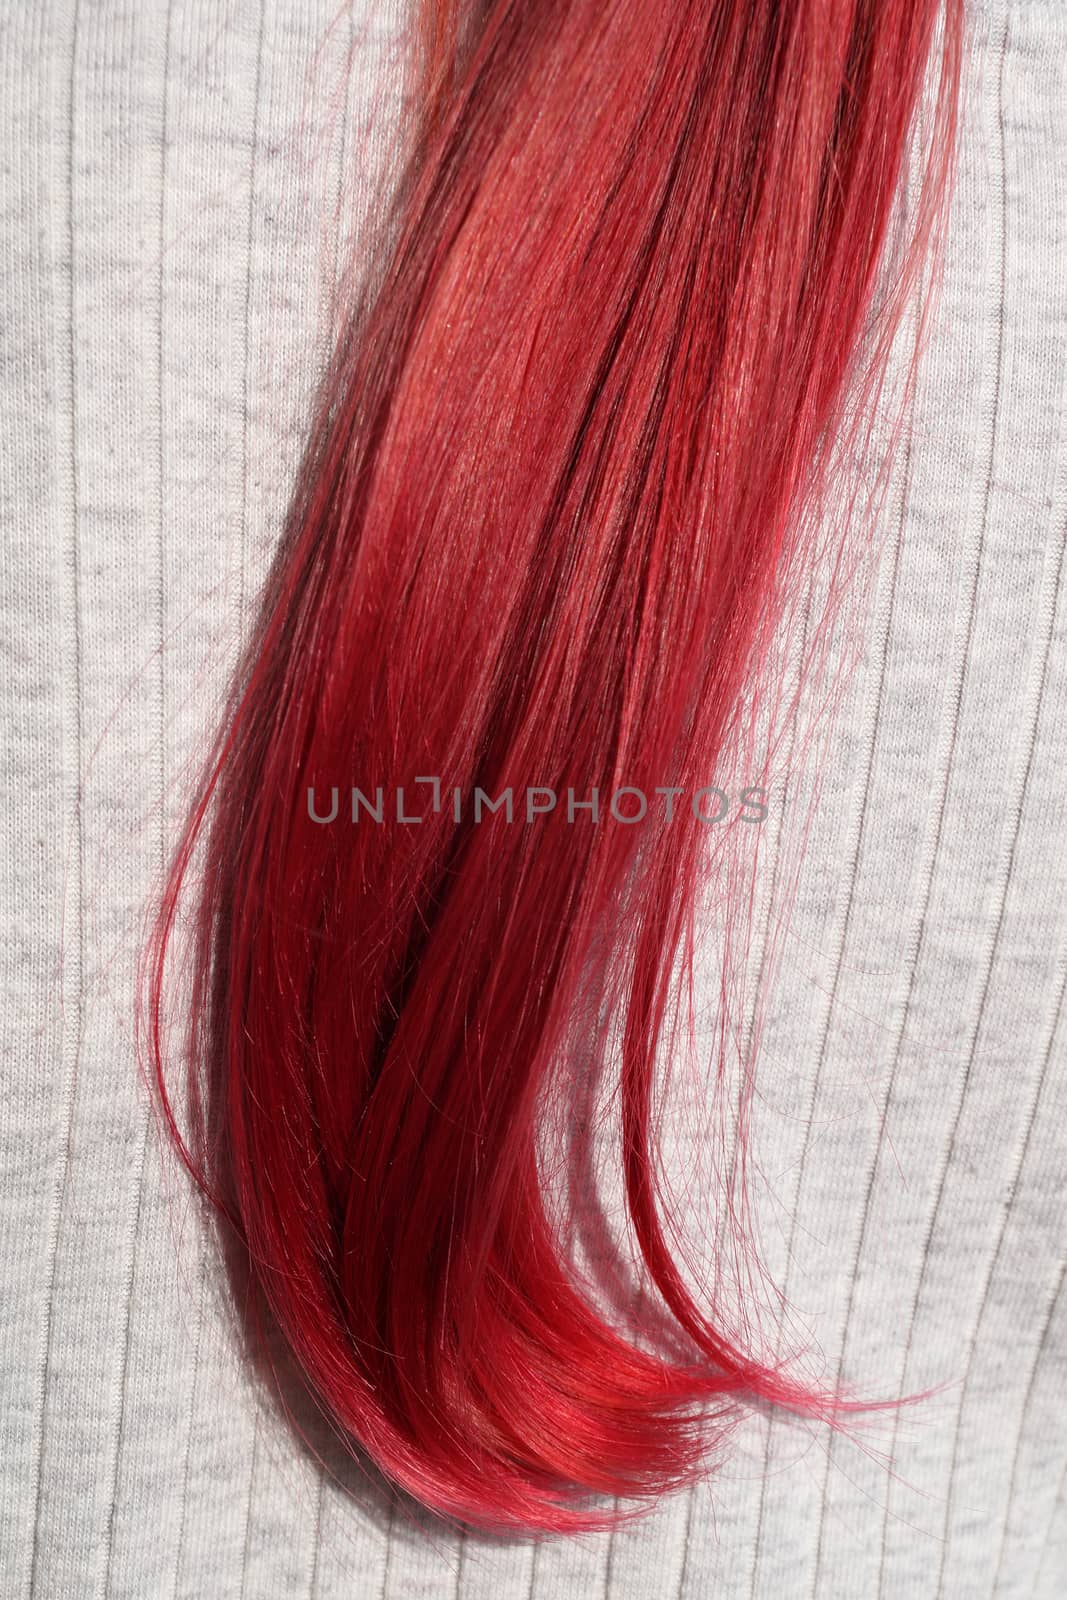 strand of dyed red female hair on a light background by Annado